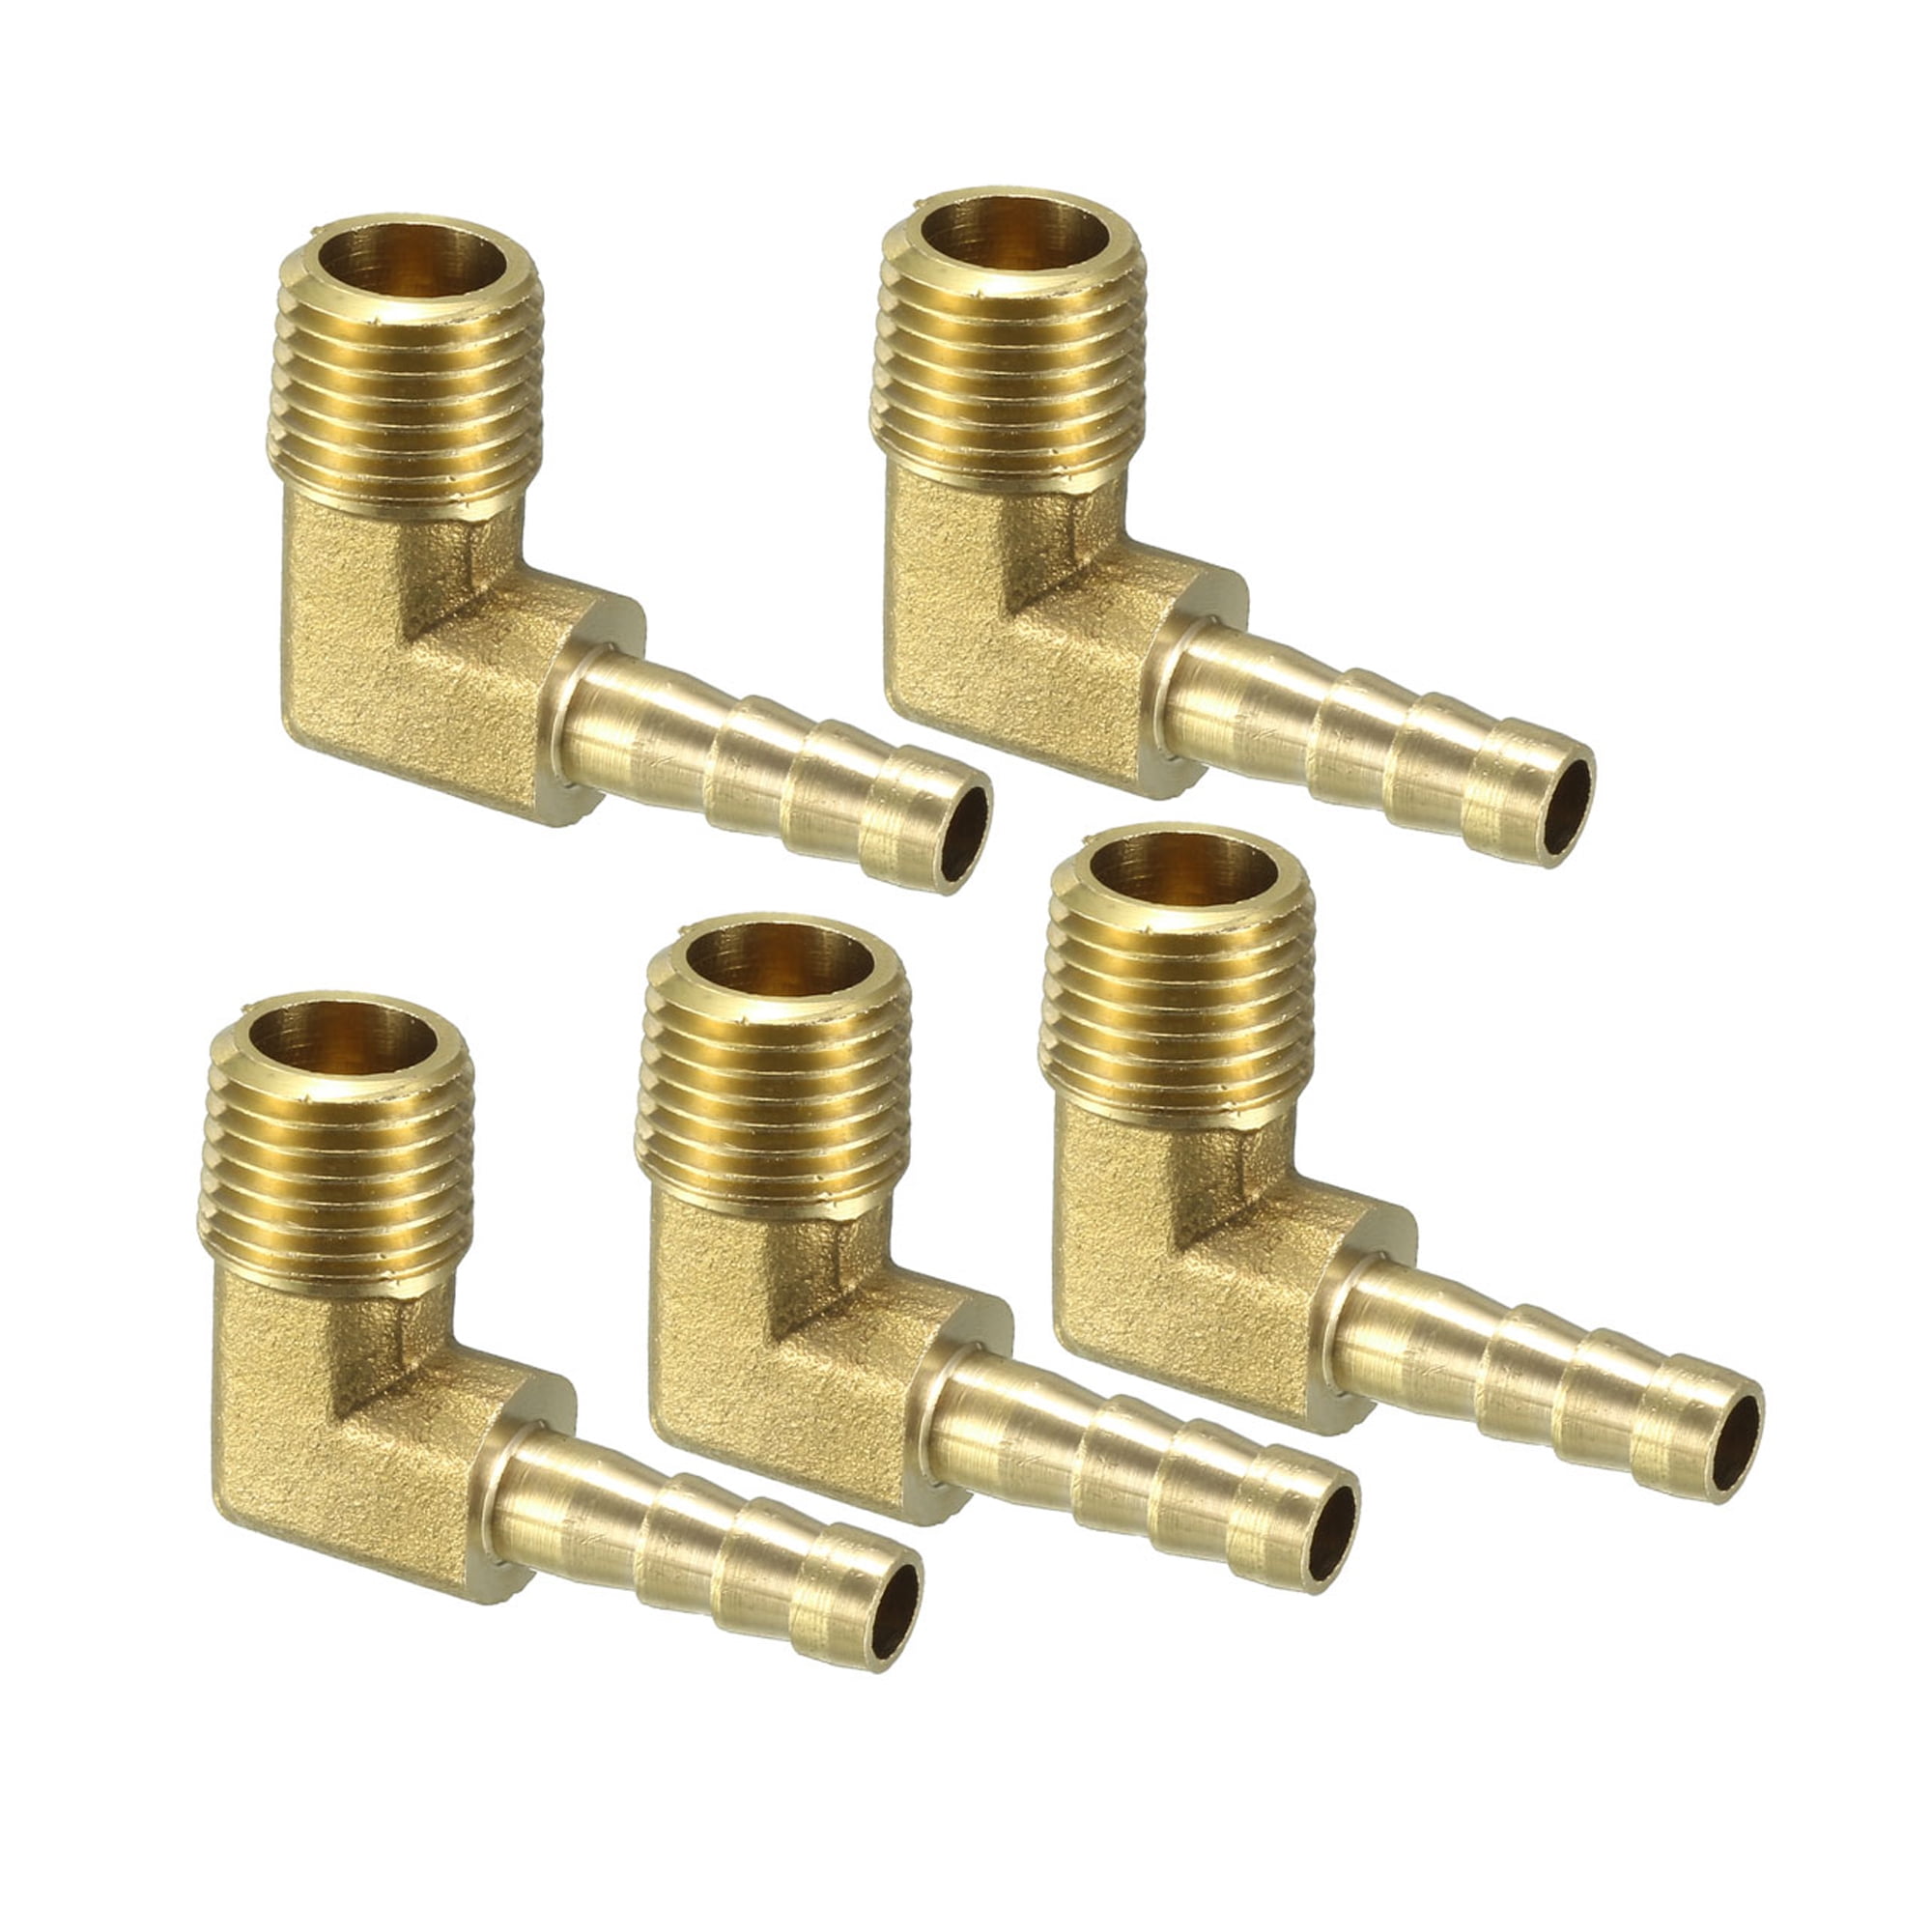 JoyTube Plastic Hose Barb Fittings 5/16 Barb X 1/4 NPT Male Thread Adapter Connector Pipe Fittings pack of 6